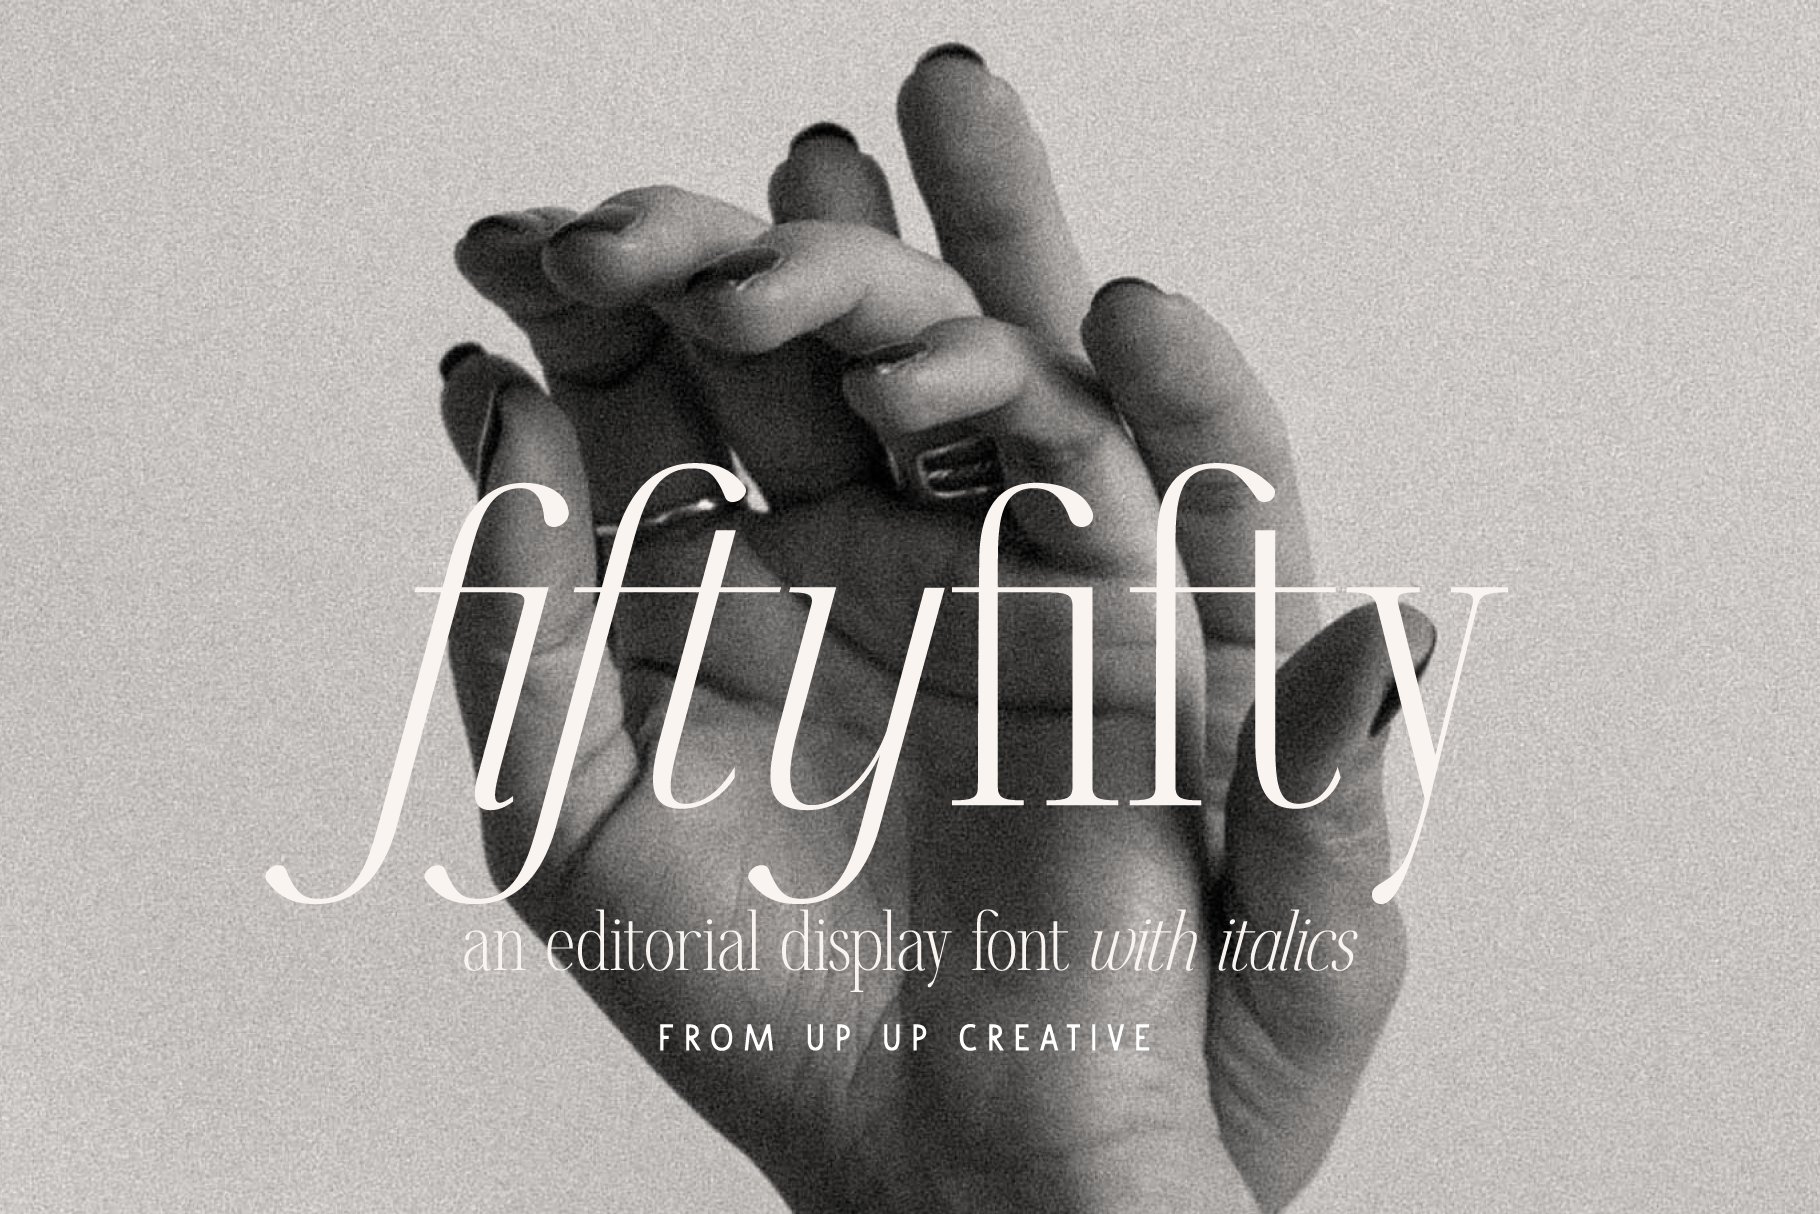 Fifty Fifty Serif Font with Italics cover image.